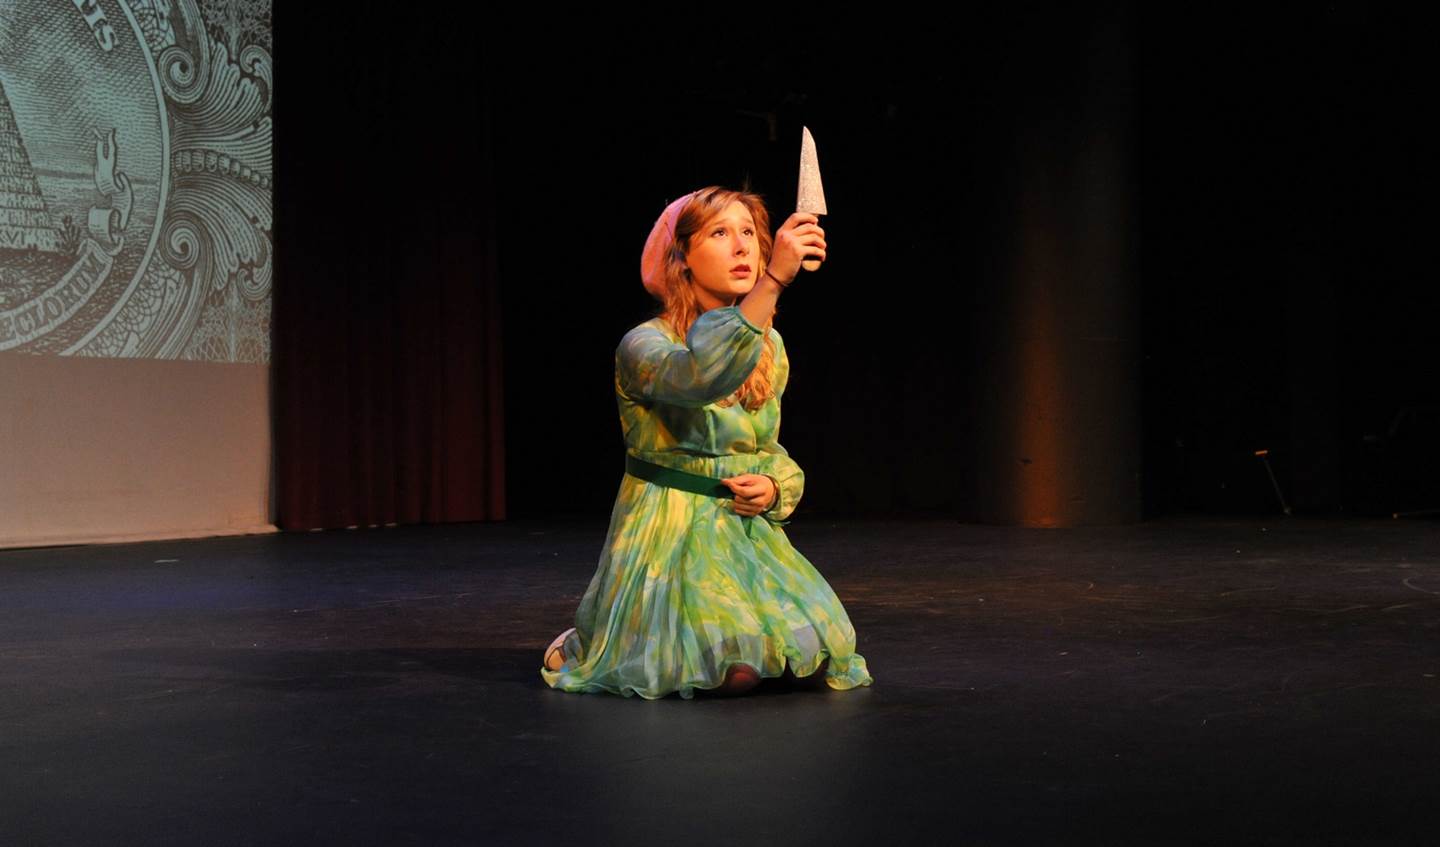 A girl in a green dress is on her knees holding a knife in the air as she looks at it with a concerned expression